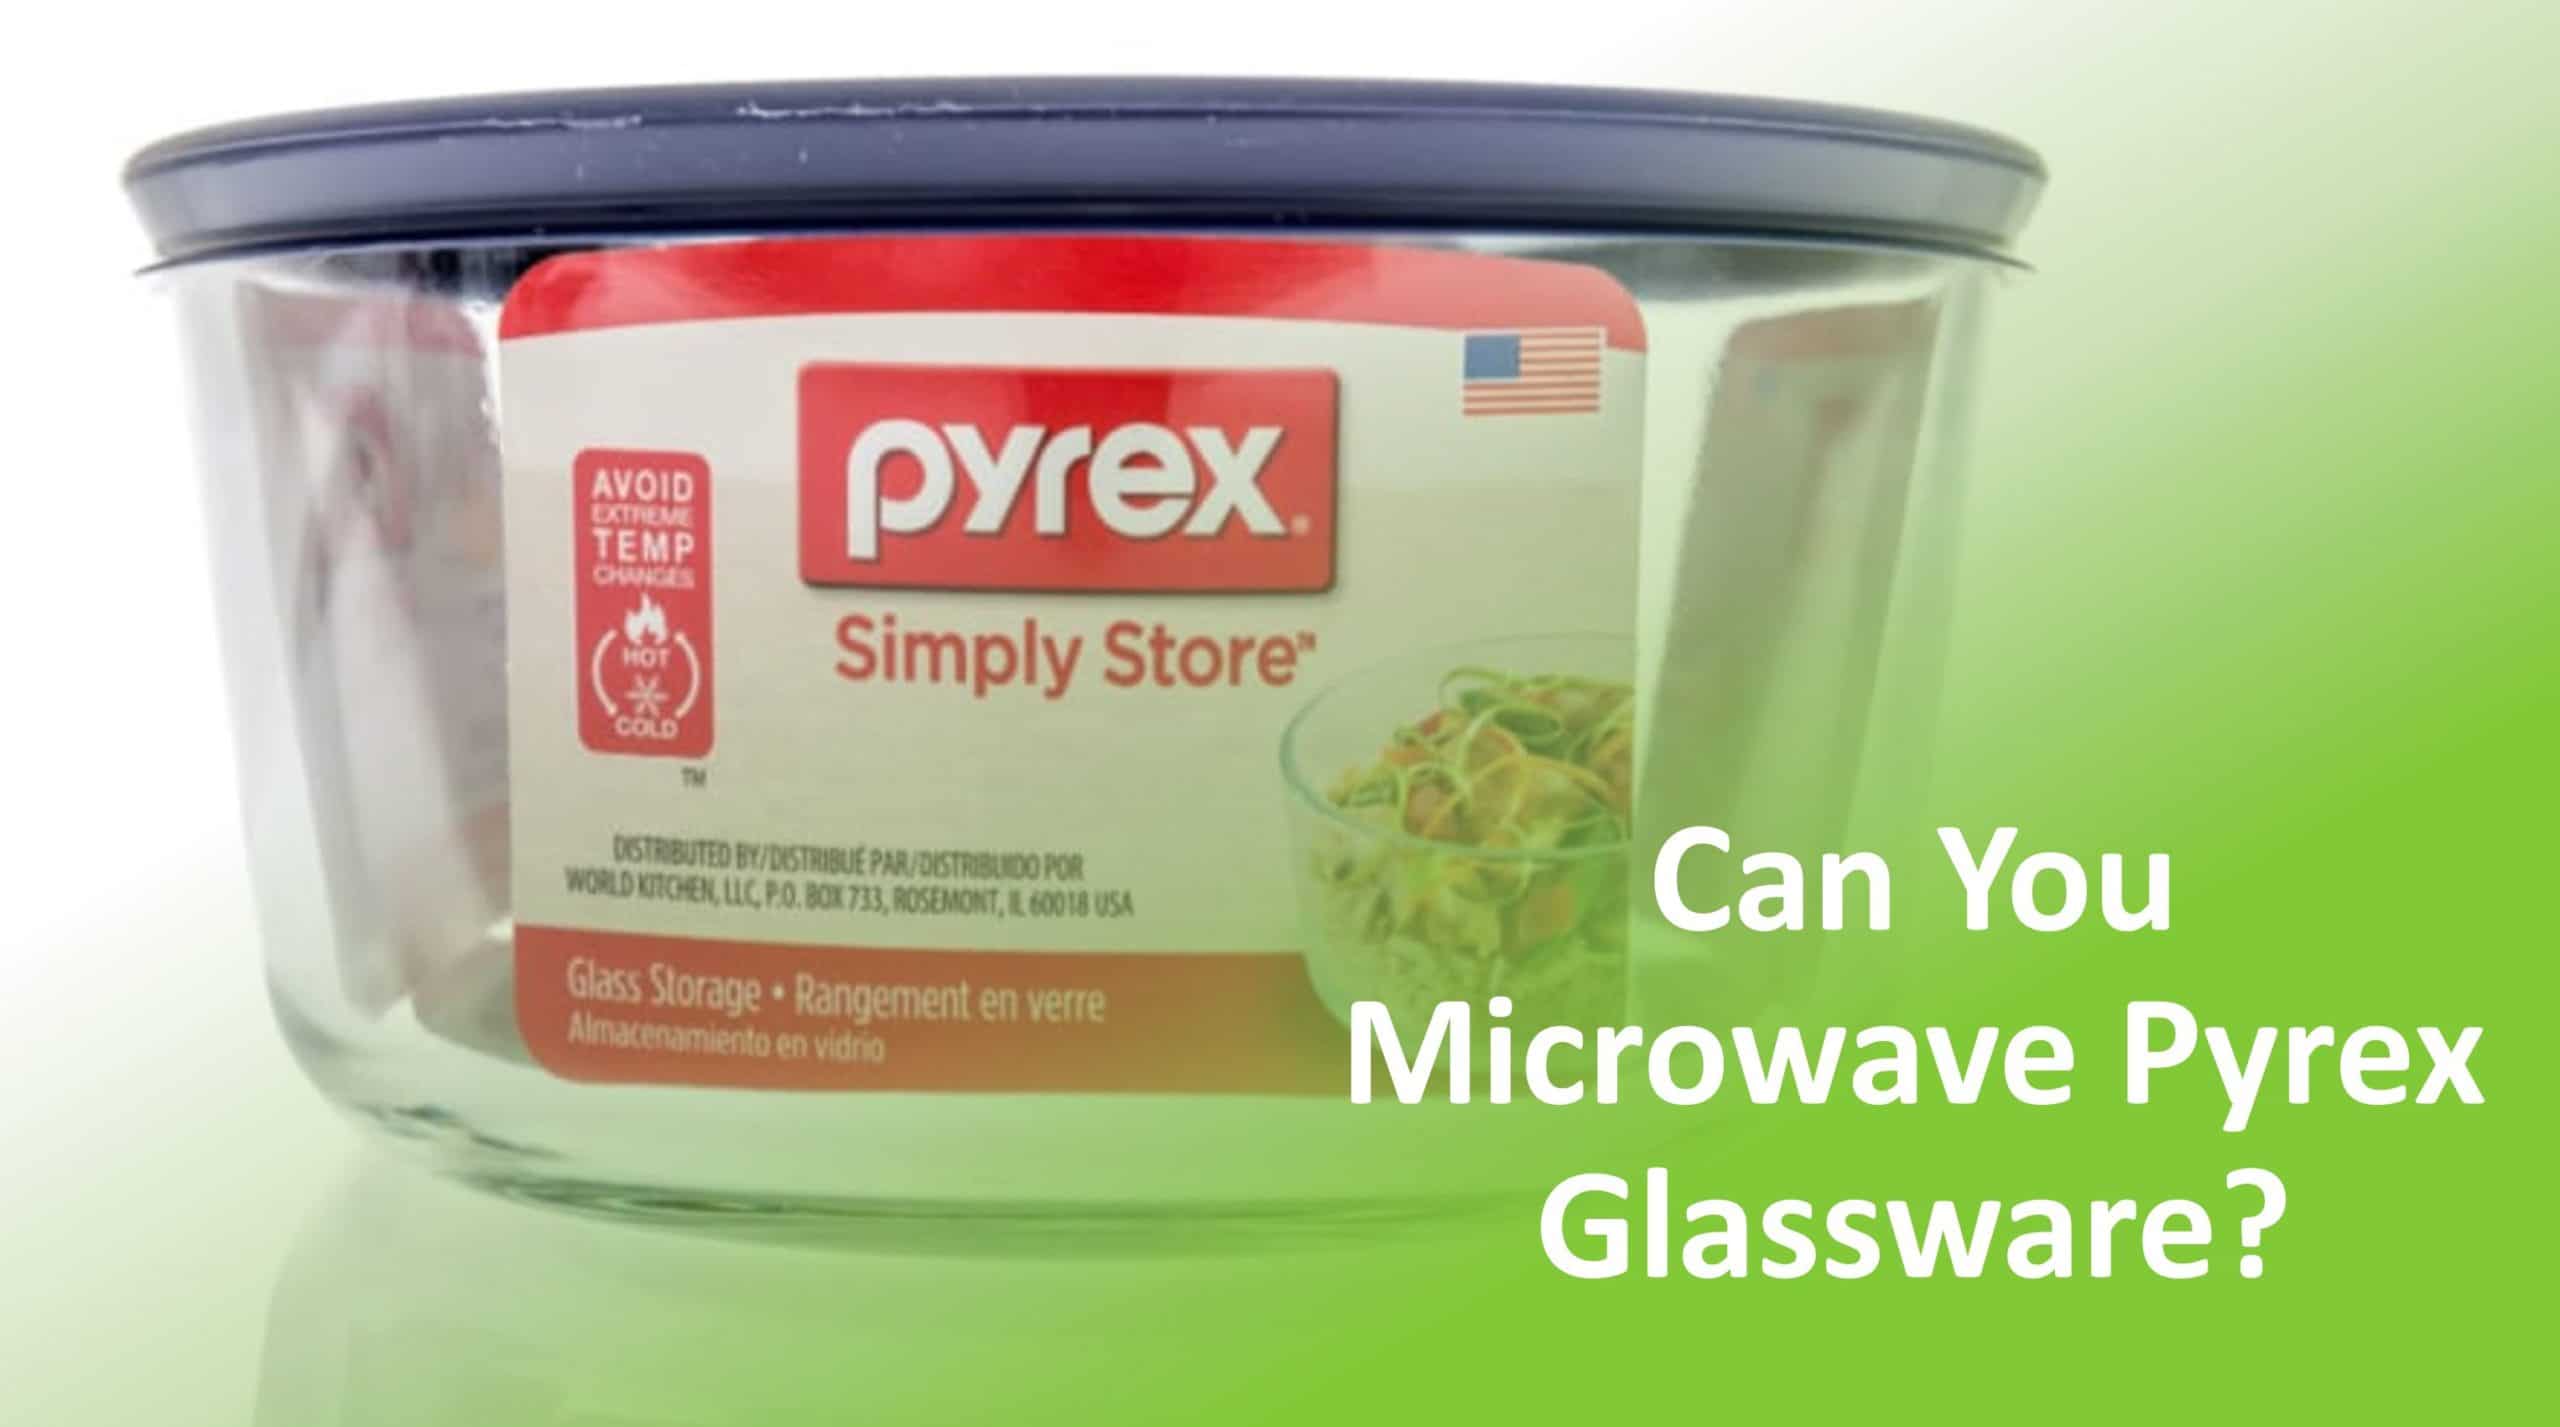 https://www.foodchamps.org/wp-content/uploads/2022/06/can-you-microwave-pyrex-glassware-scaled.jpg